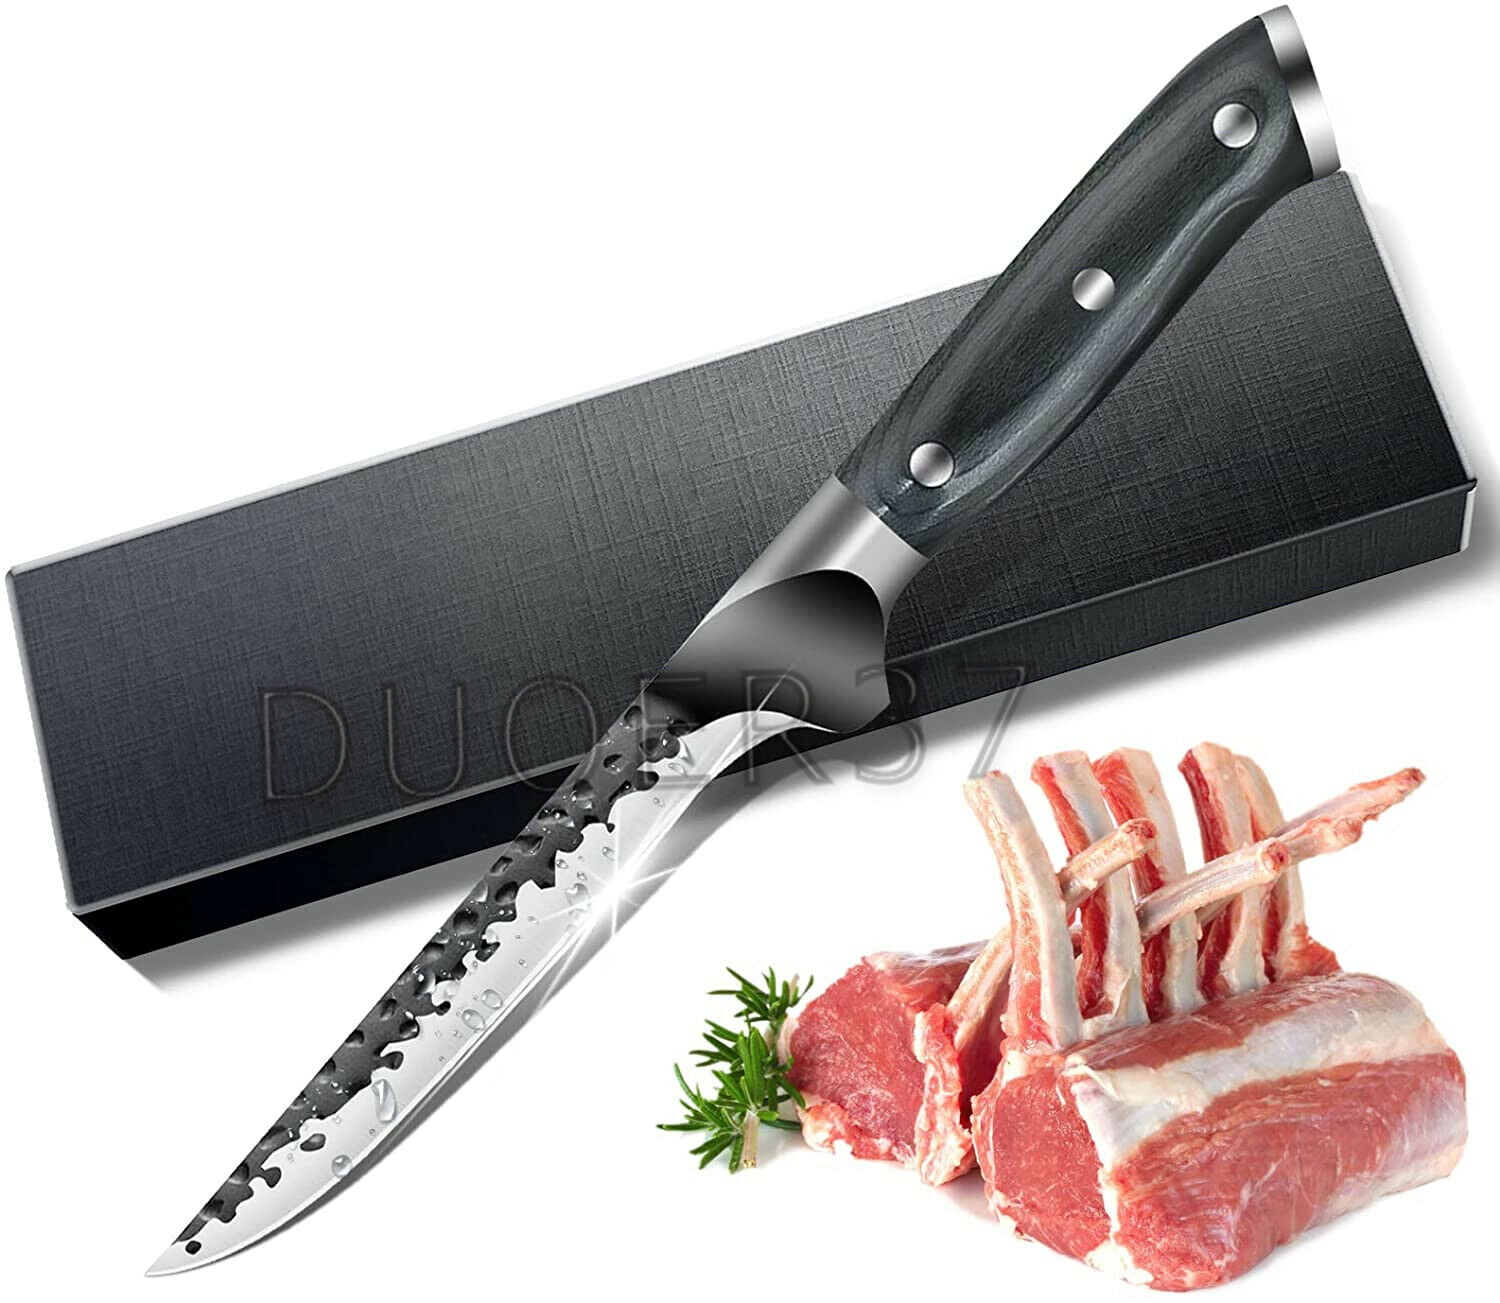 Boning Knife 6 Inch, Fish Fillet Knives Japanese 420J2 Stainless Steel and  Military Grade G10 Handle, Tailored Sheath and Sharpener for Meat, Fish